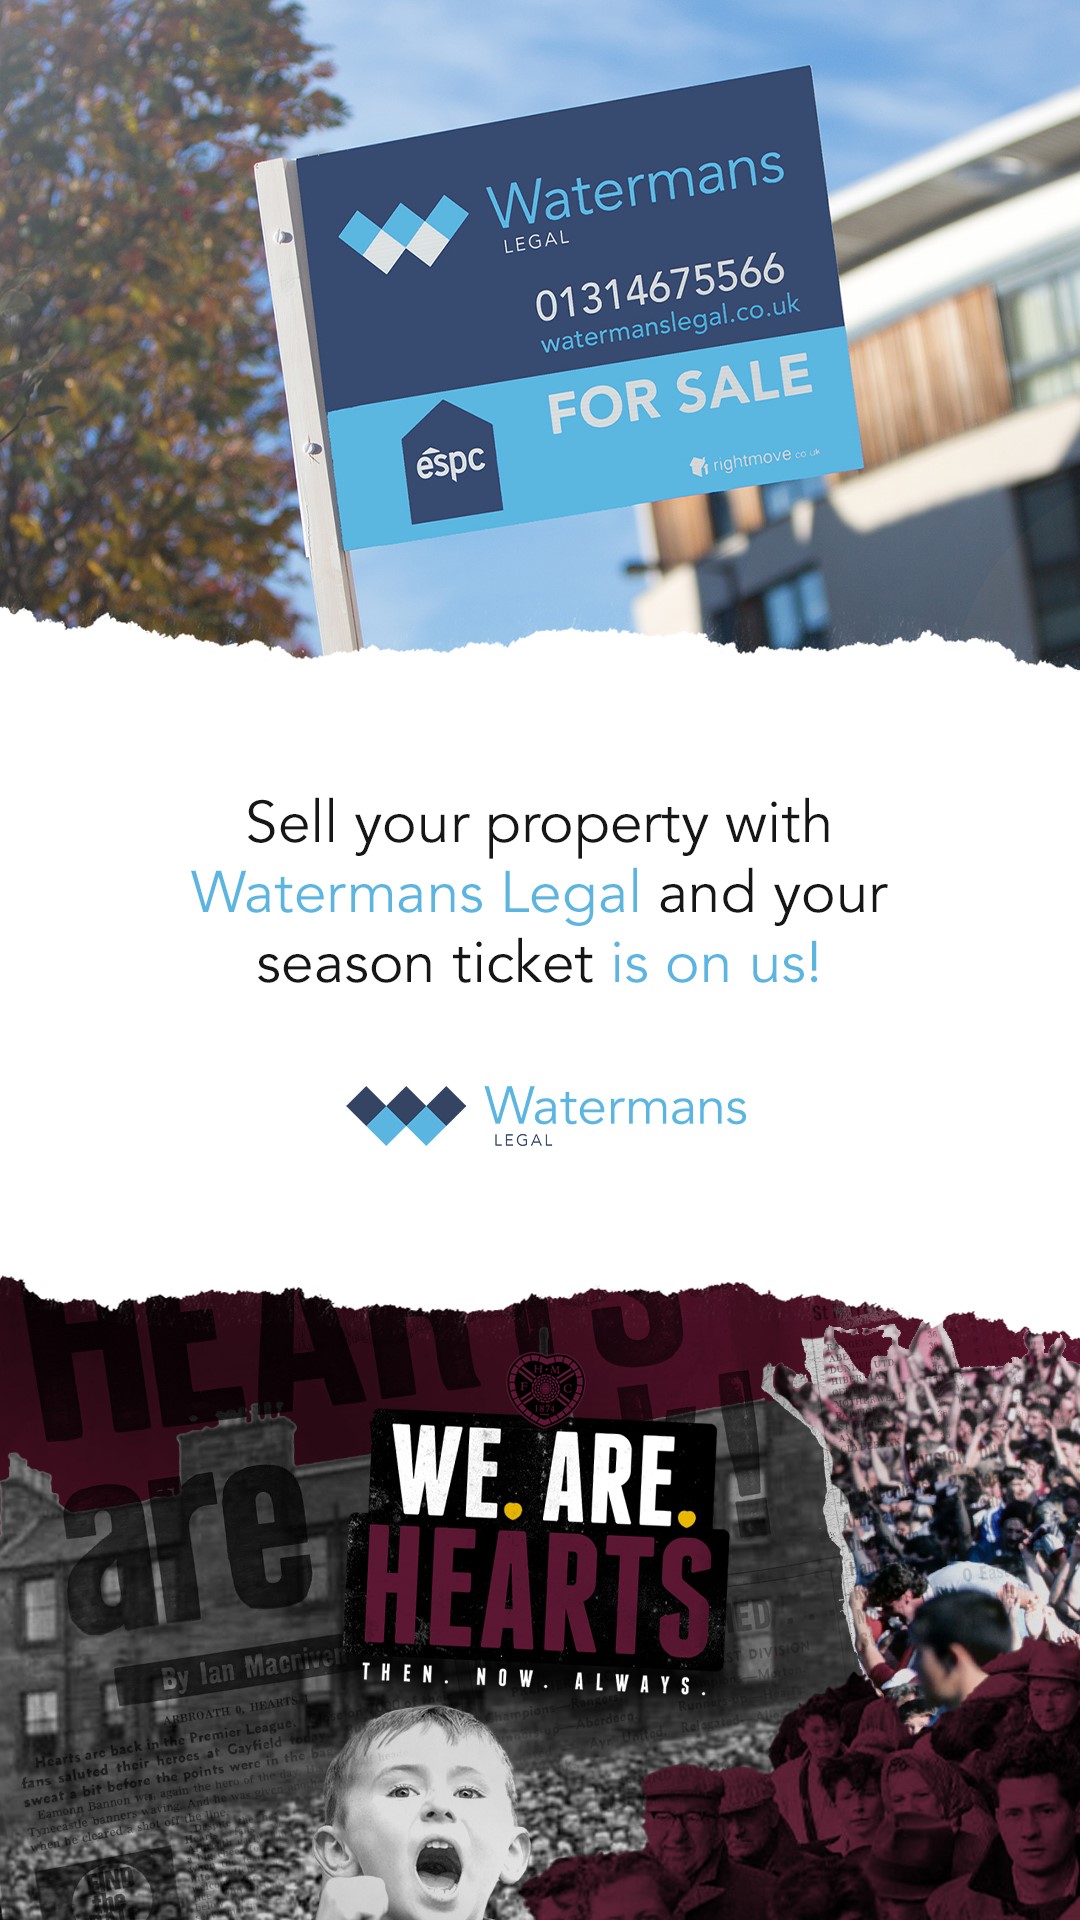 Watermans and Hearts story